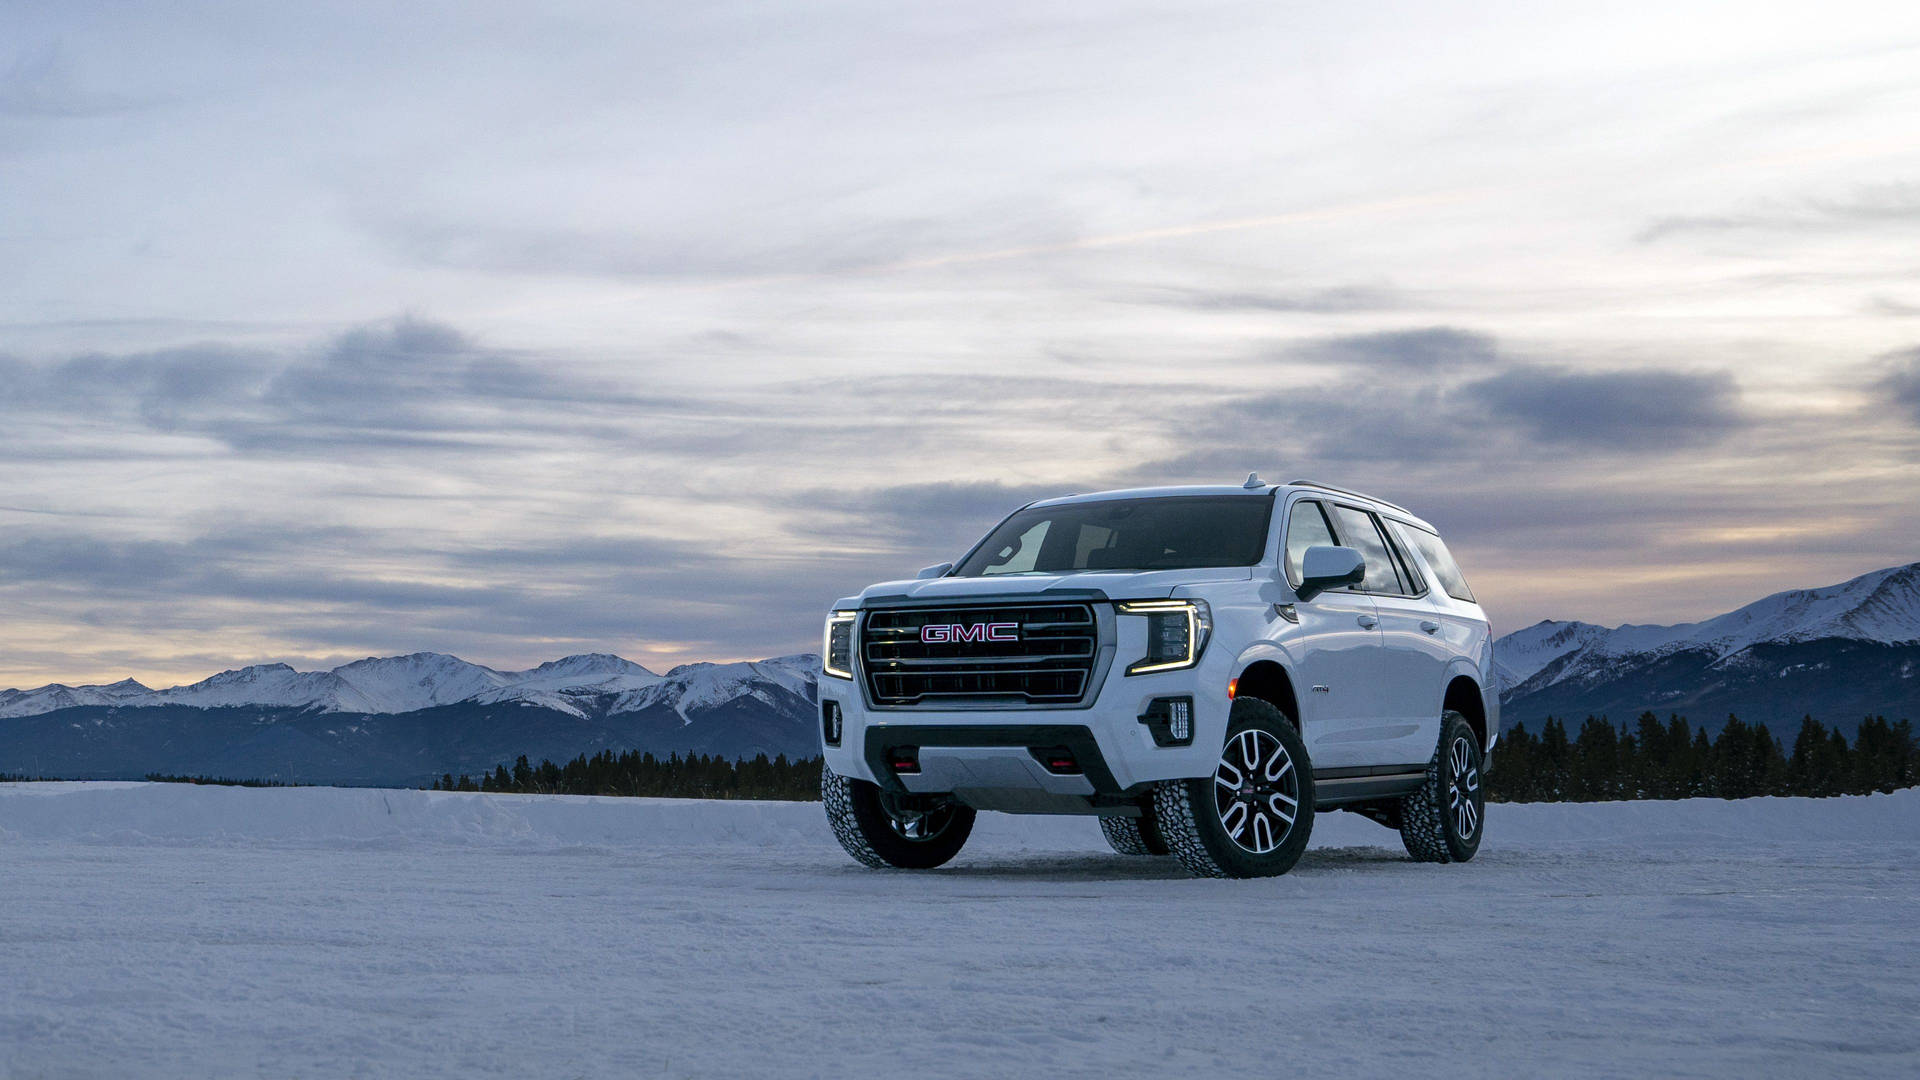 Gmc Yukon In An Icy Place Wallpaper